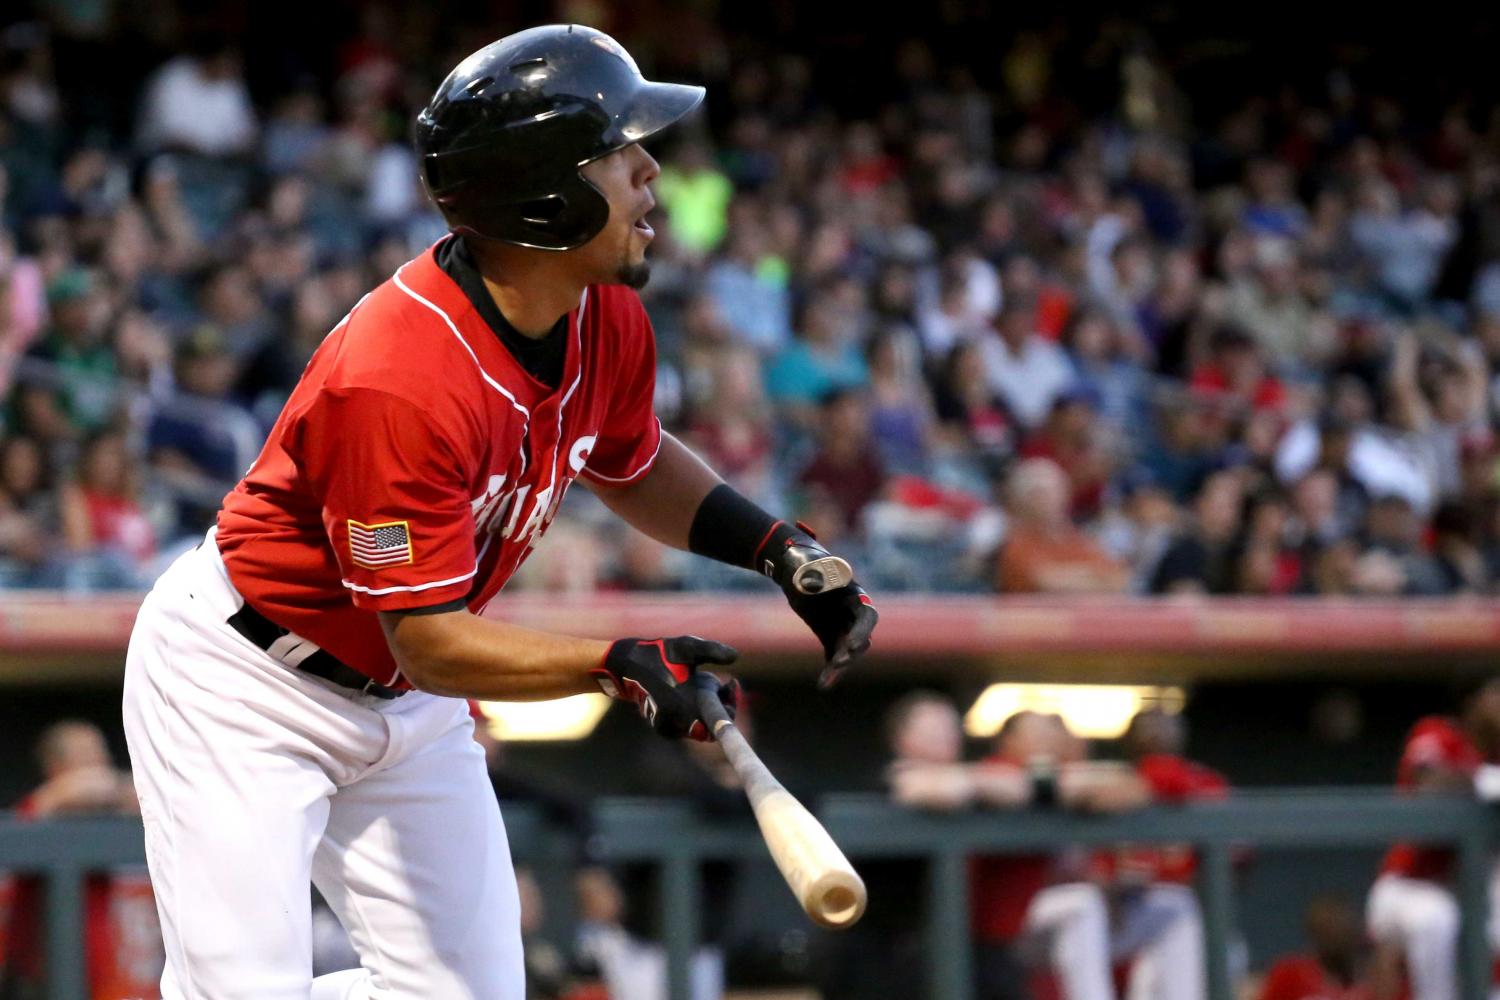 Chihuahuas complete comeback victory to top Oklahoma City